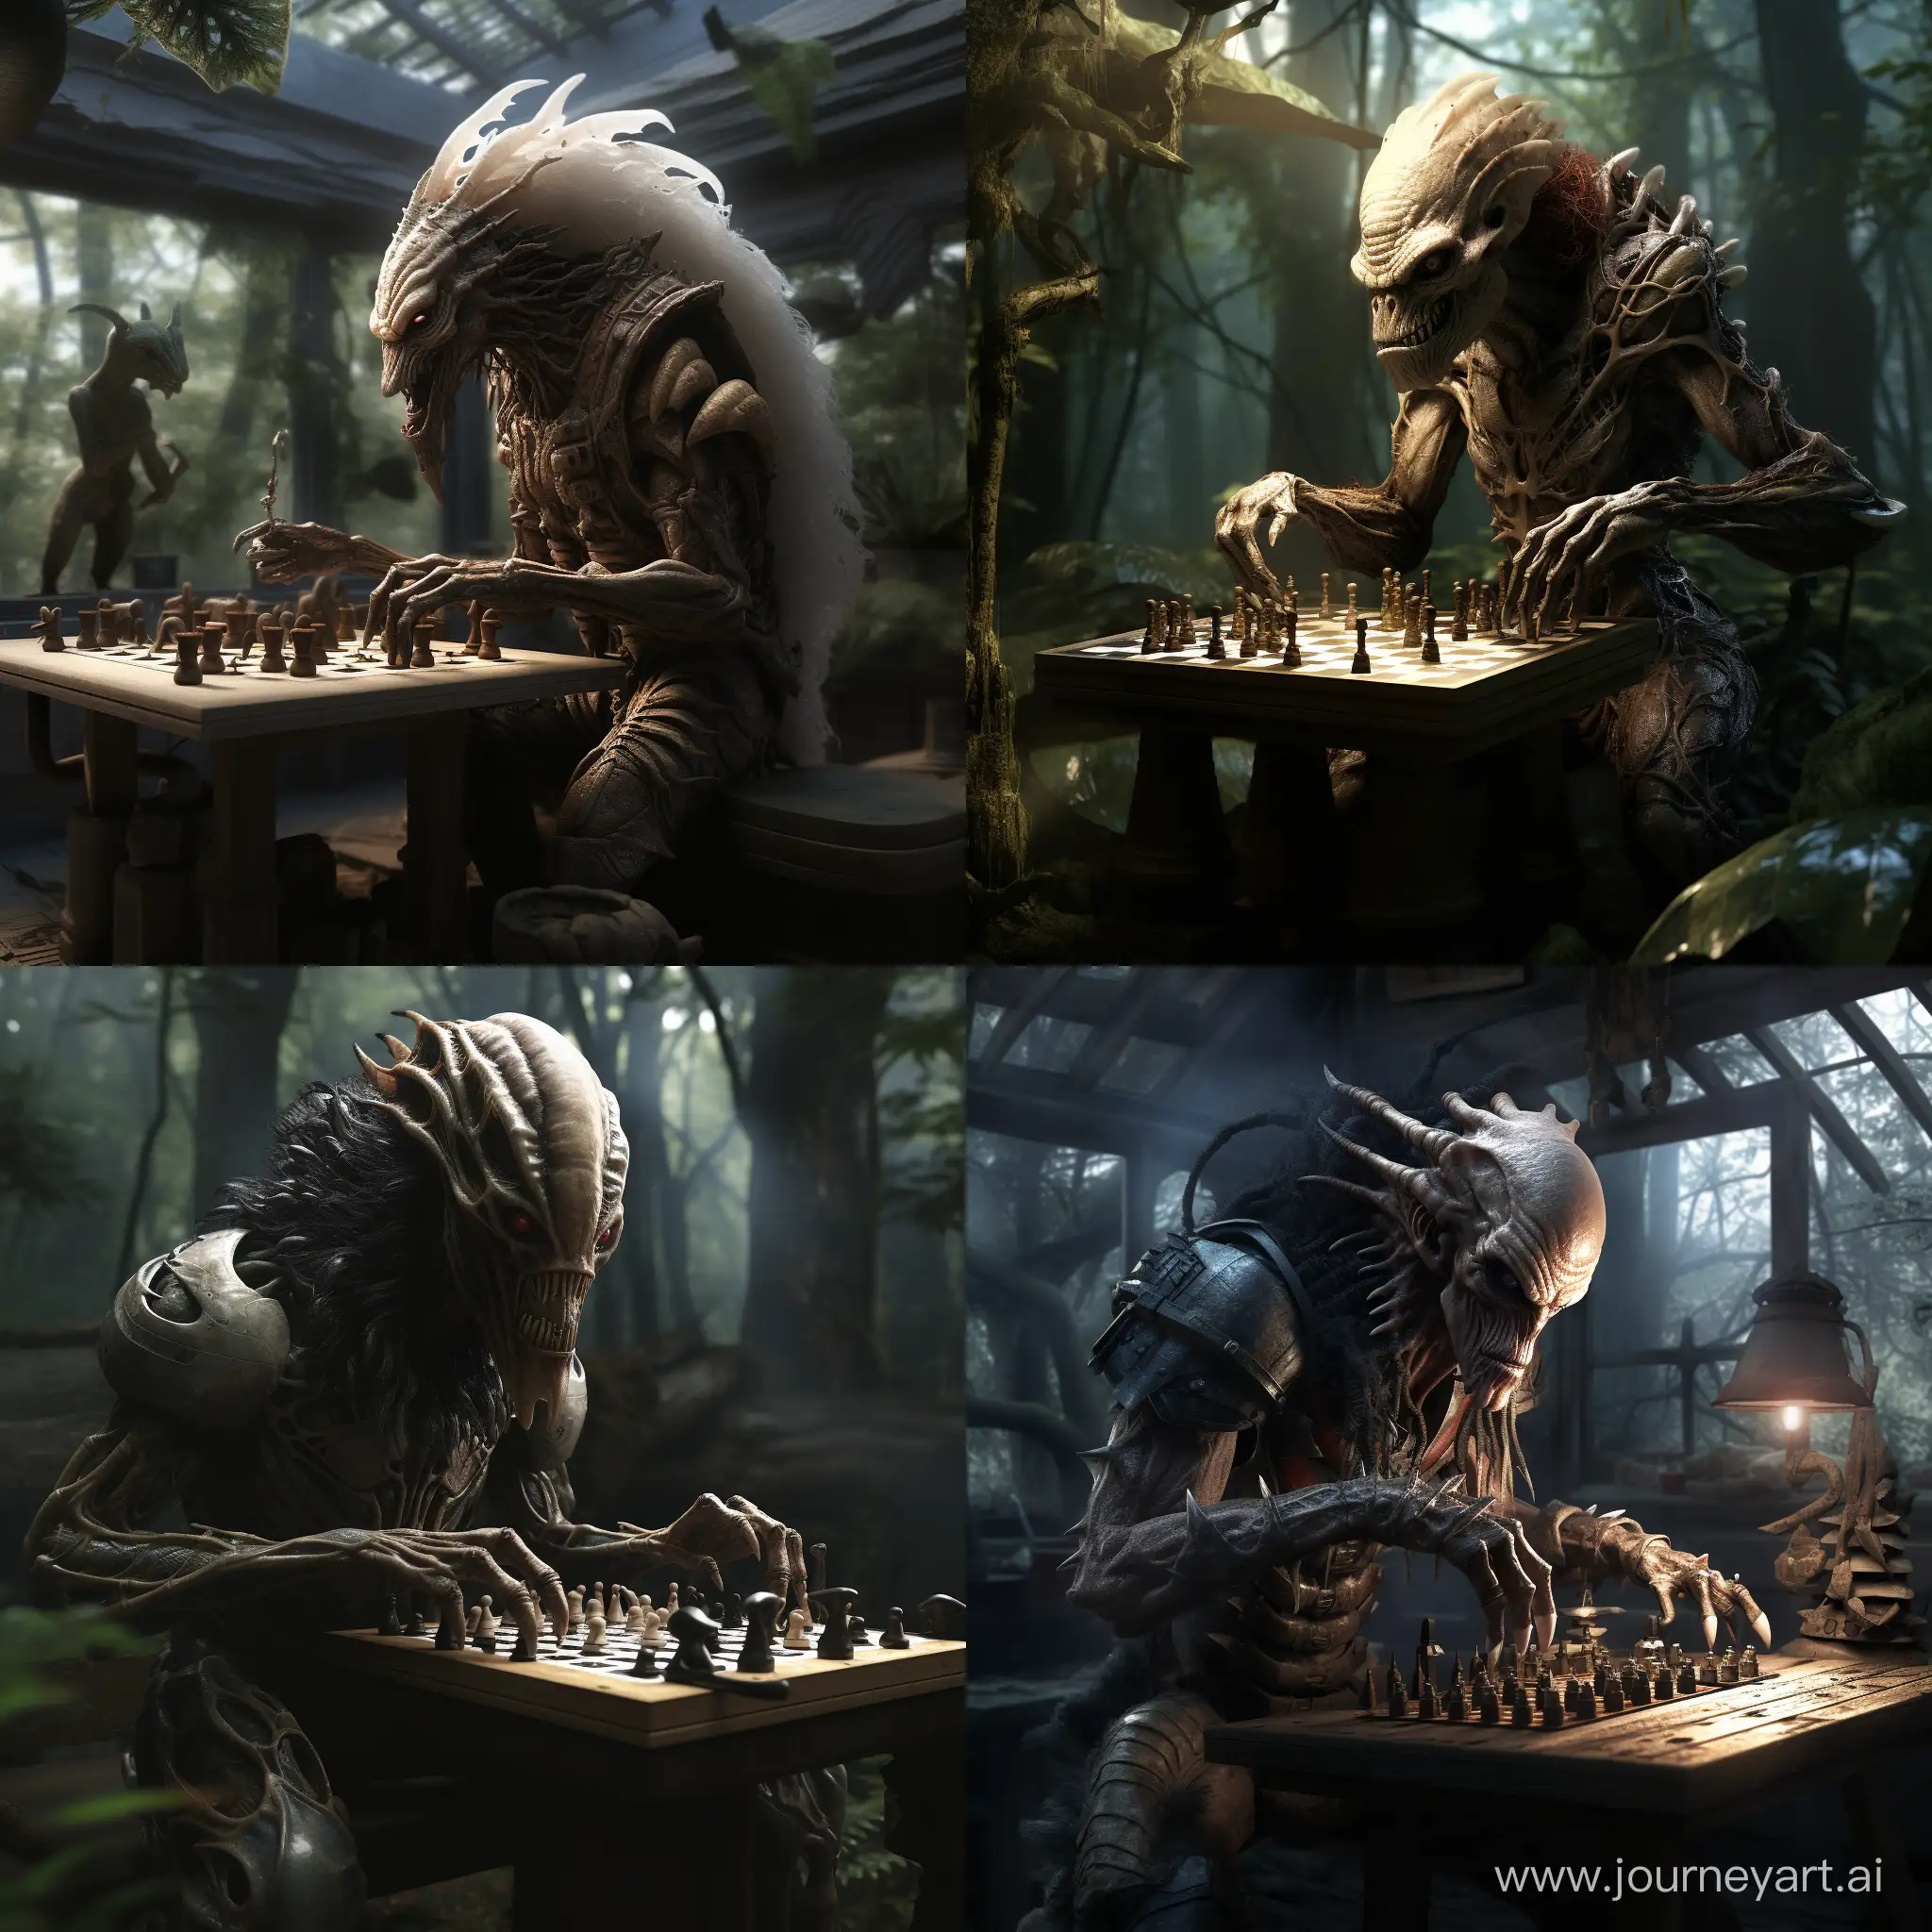 Eerie-Alien-Chess-Game-in-a-Tree-House